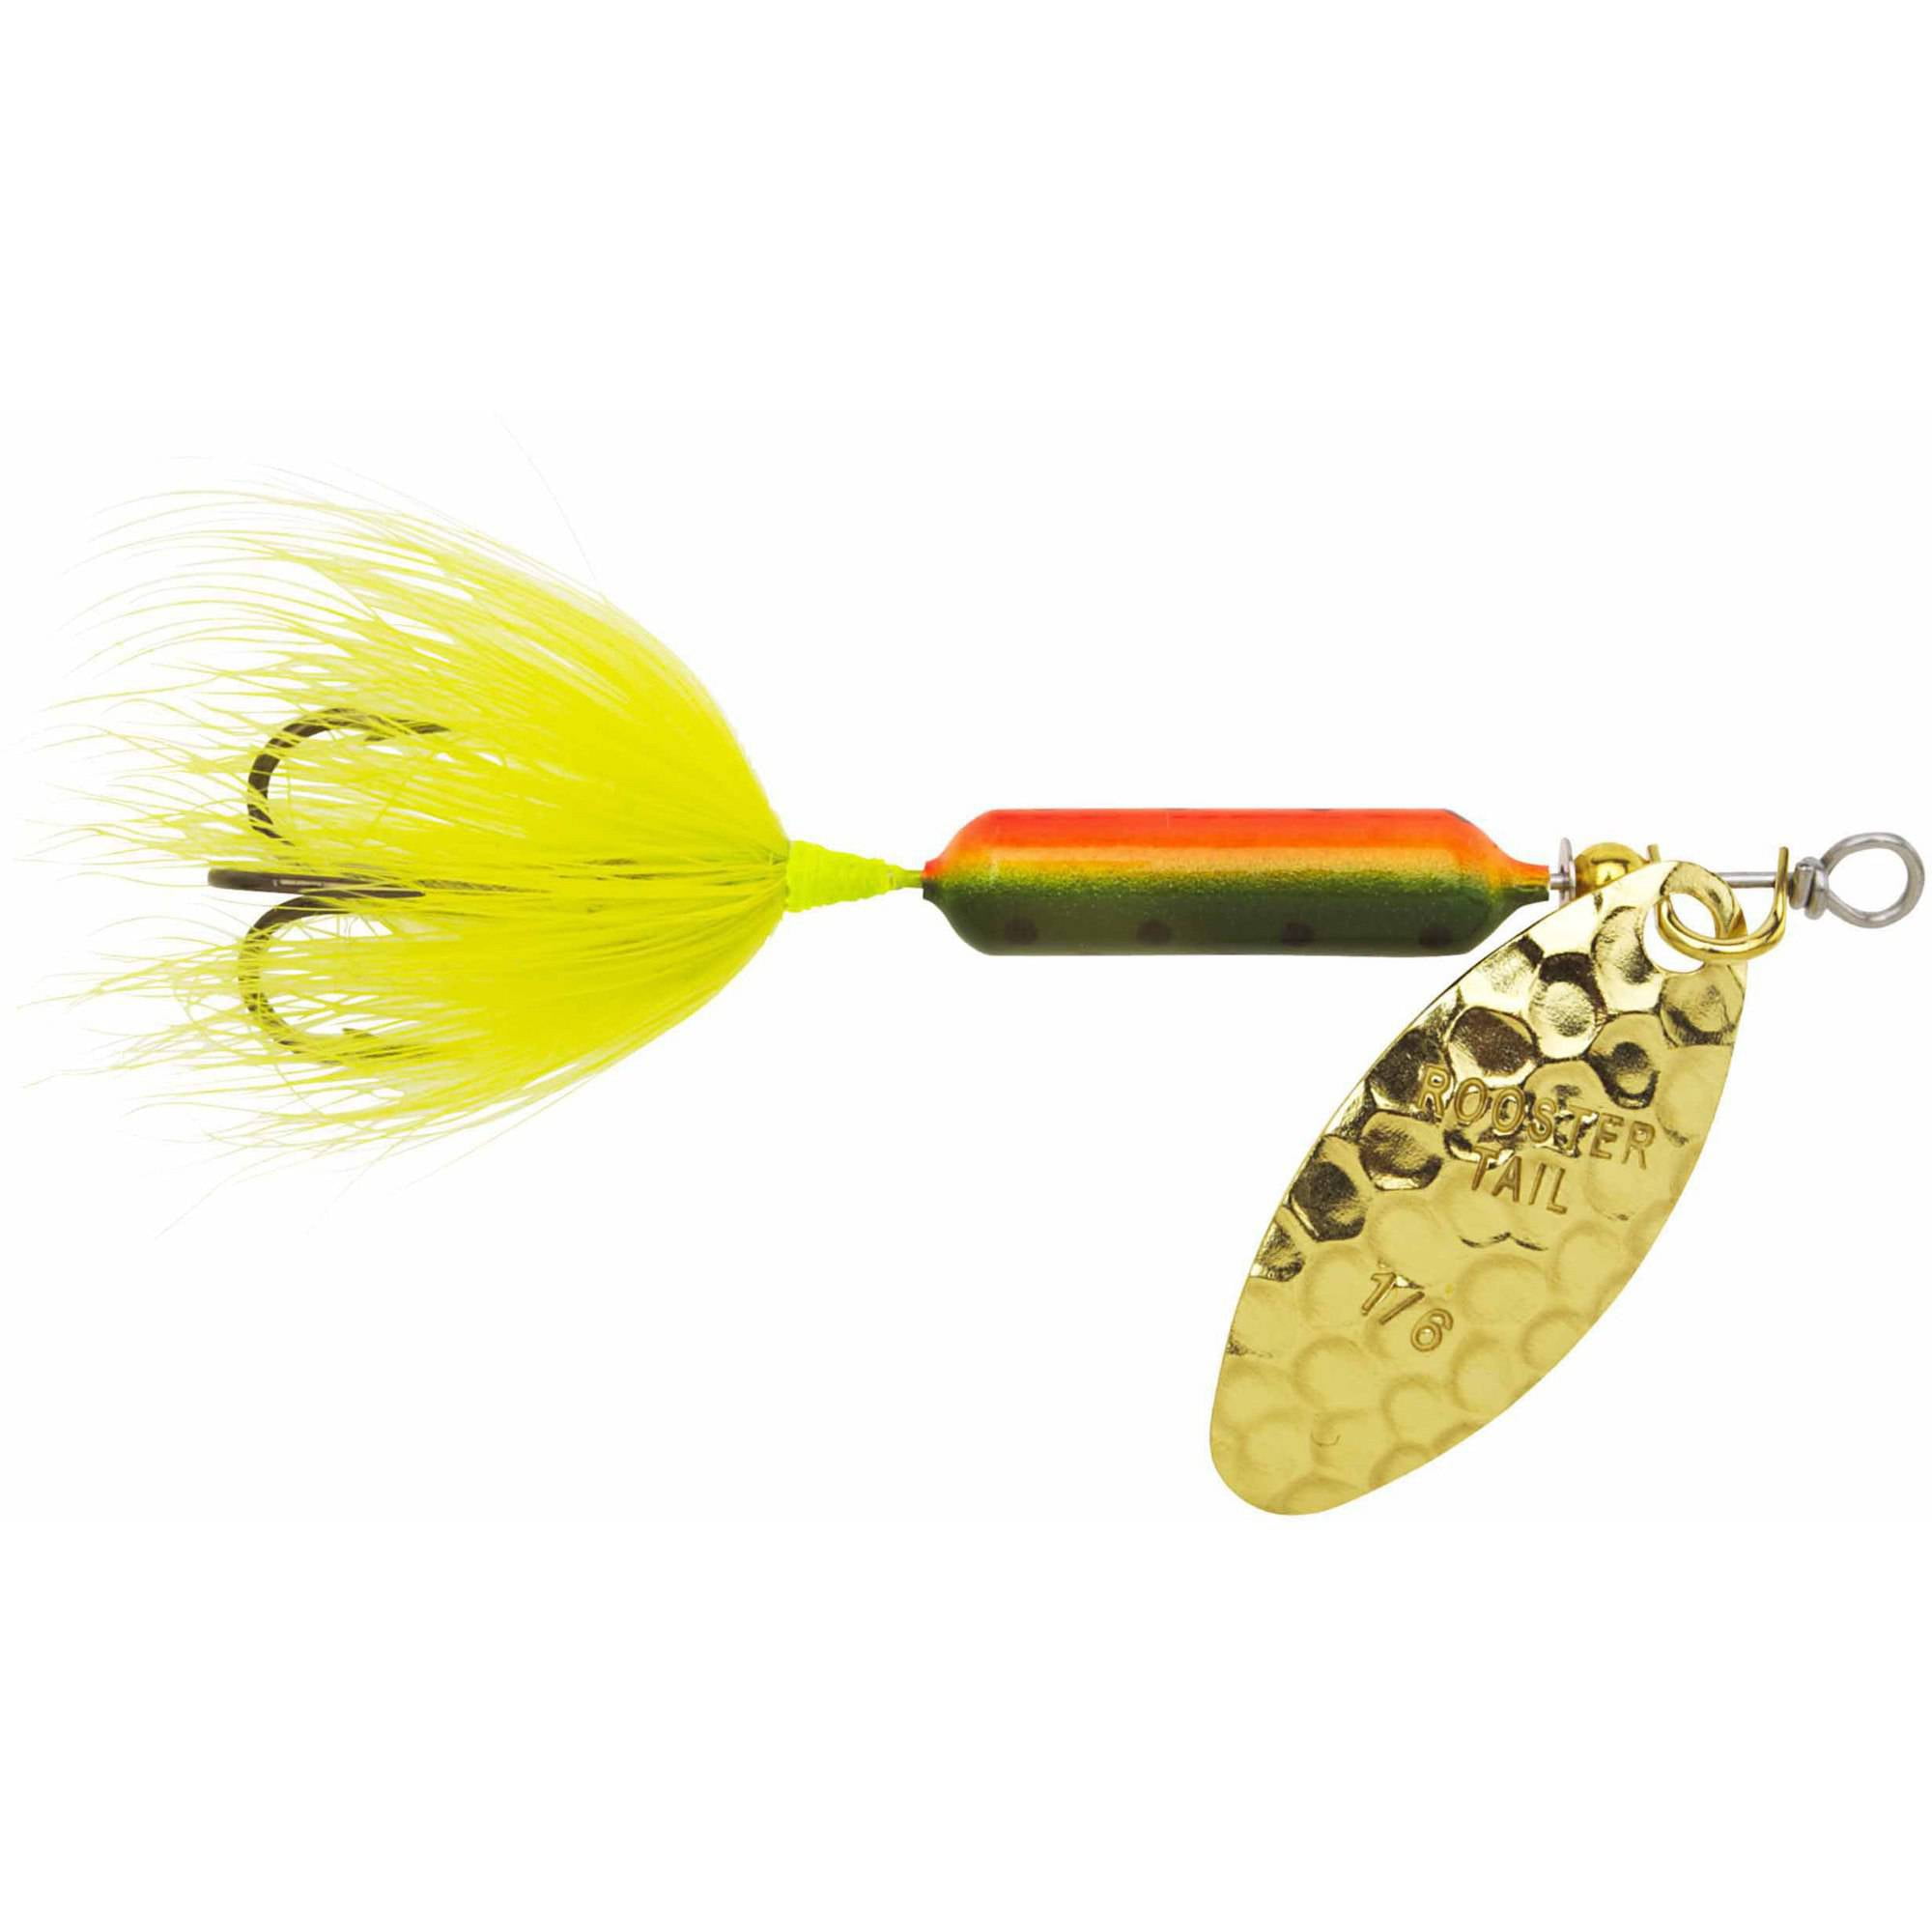 Worden's Rooster Tail, Inline Spinnerbait Fishing Lure, Hammered